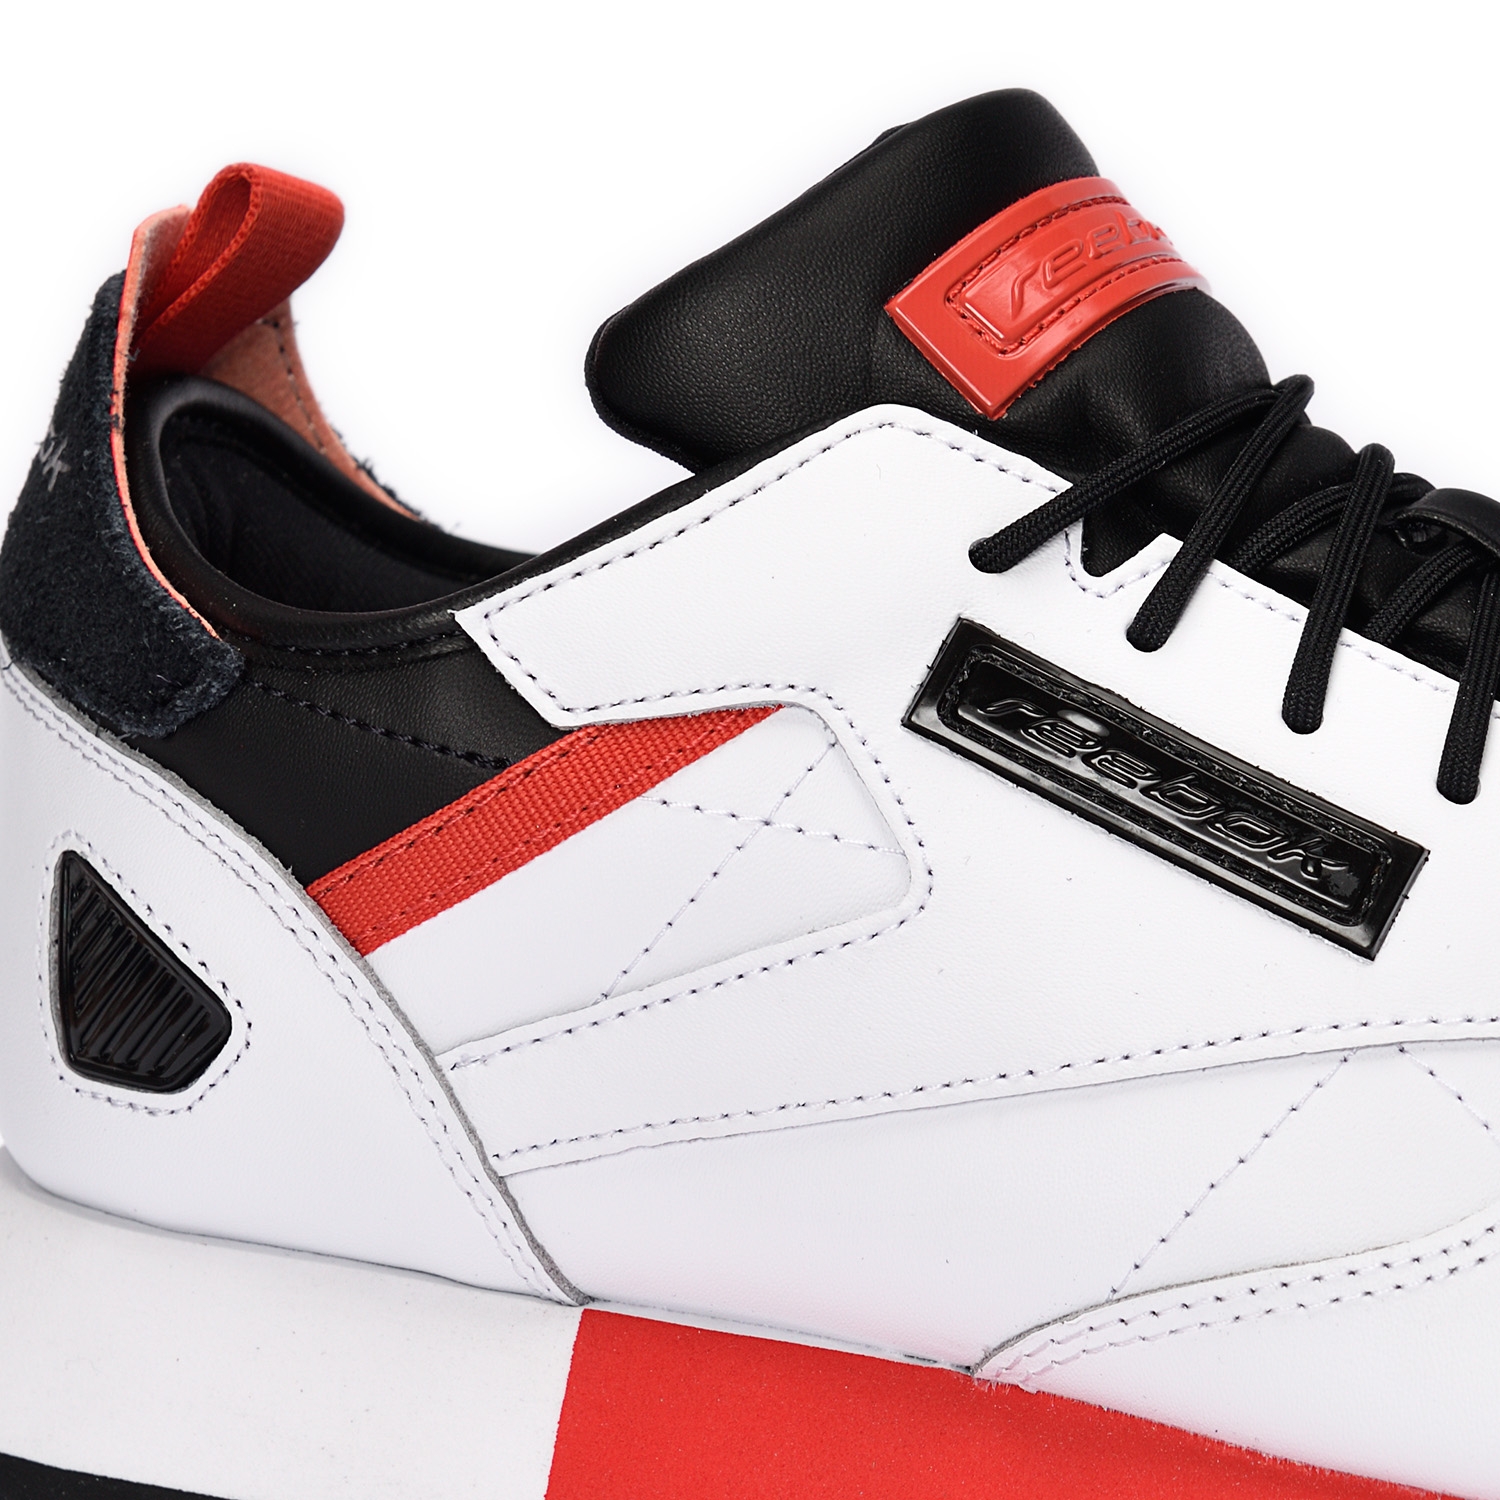 Reebok Classic Leather REE:DUX White / Black / Radiant Red